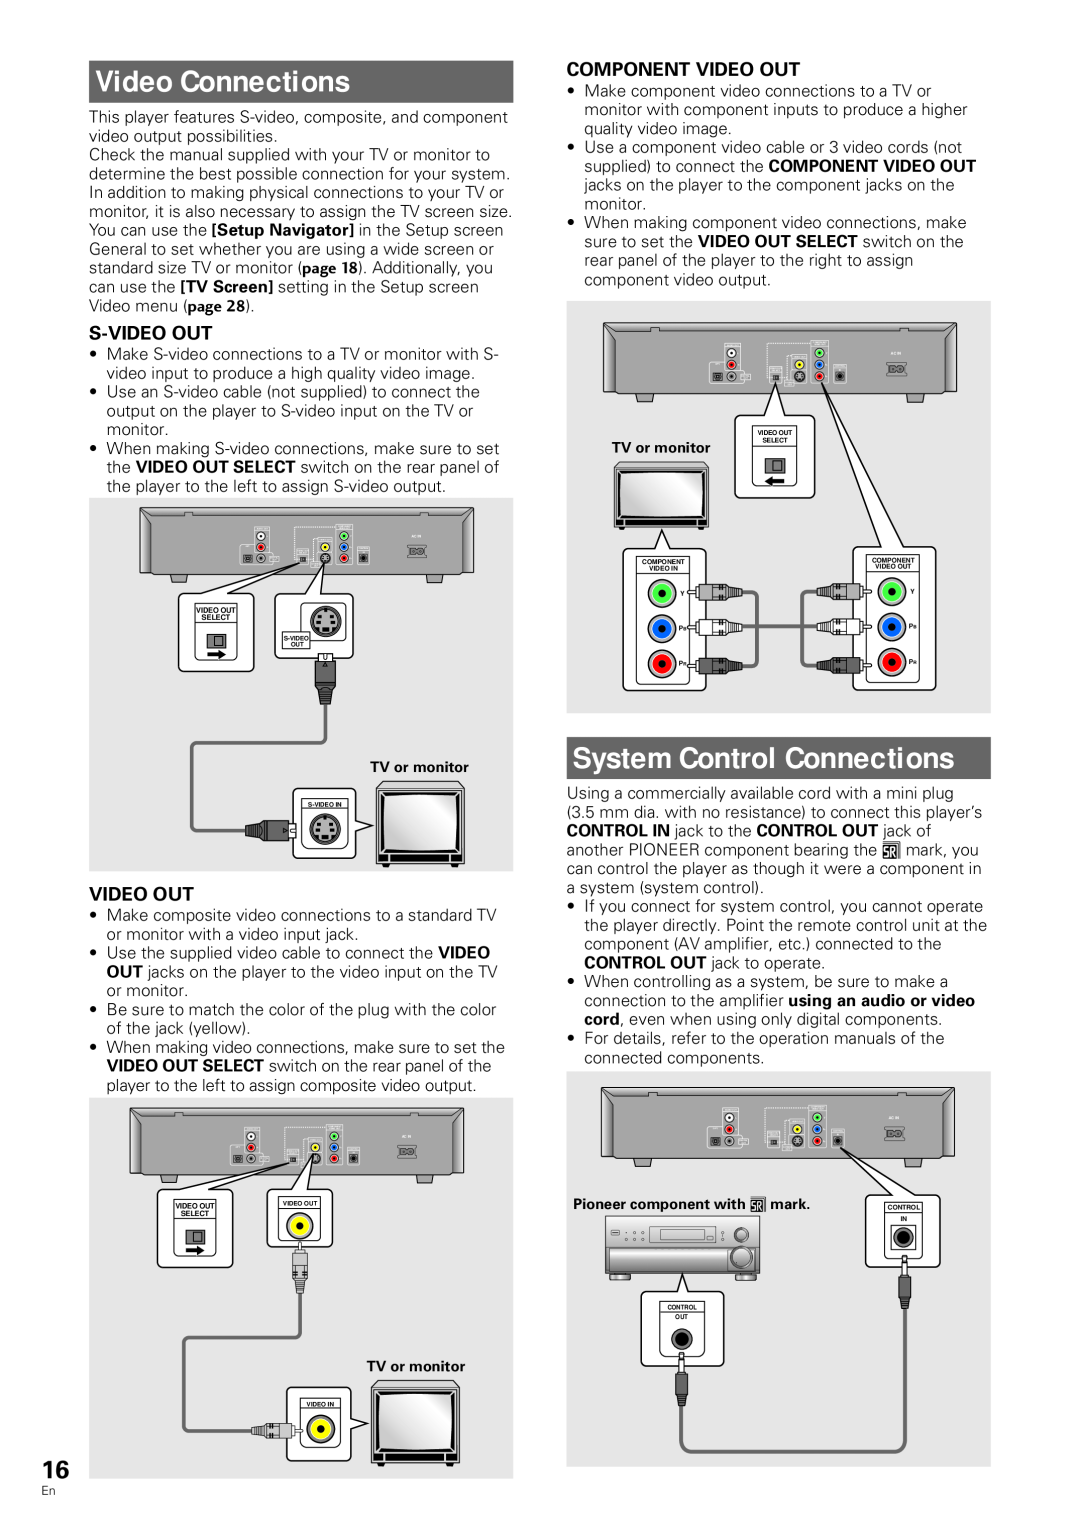 Pioneer DV-343 operating instructions Video Connections, System Control Connections, S-Video Out, Component Video Out 